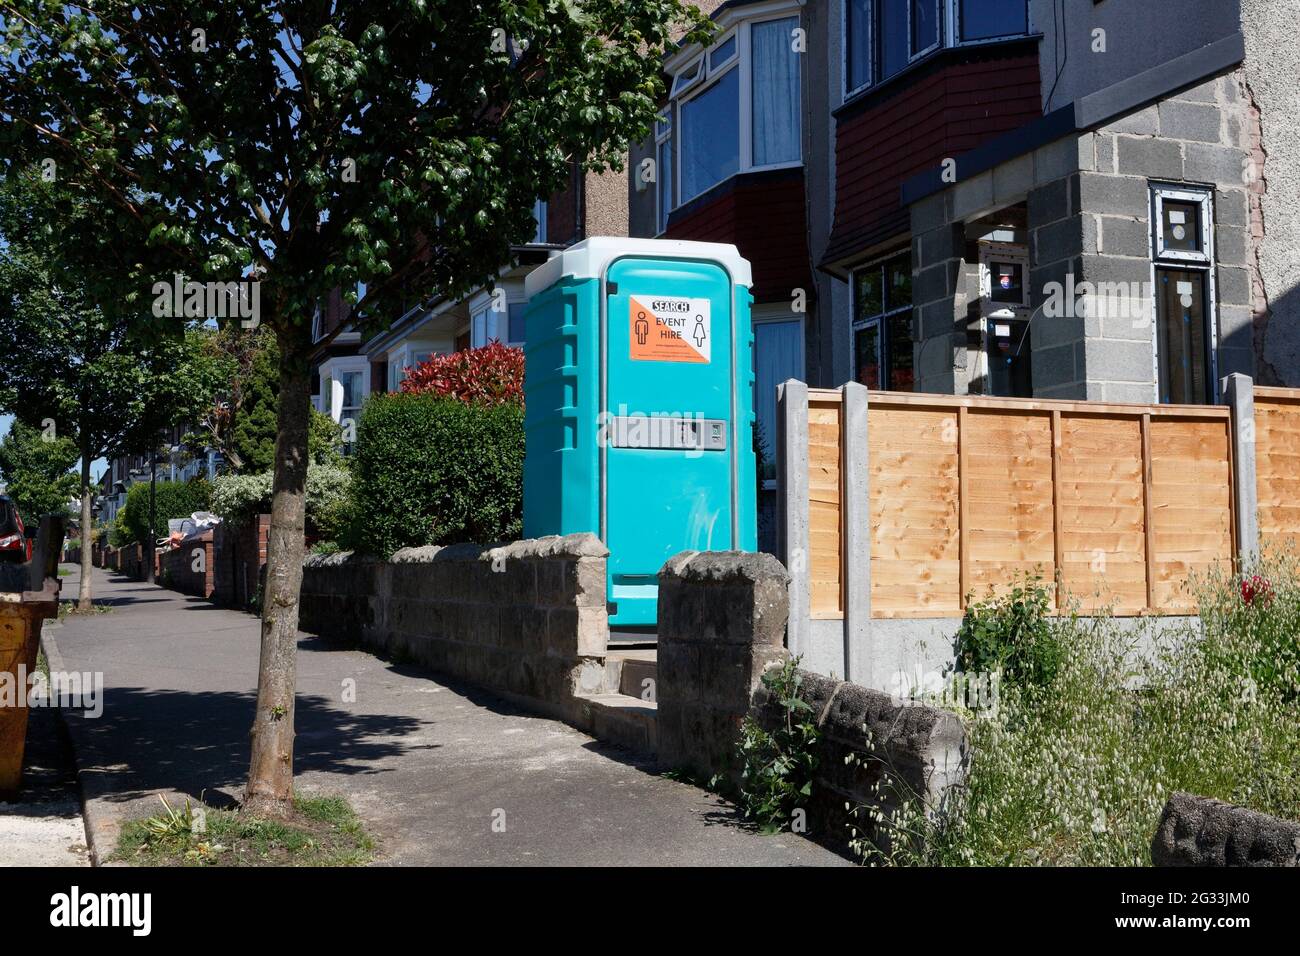 portableble toilet cabin in garden of house during building works Stock Photo